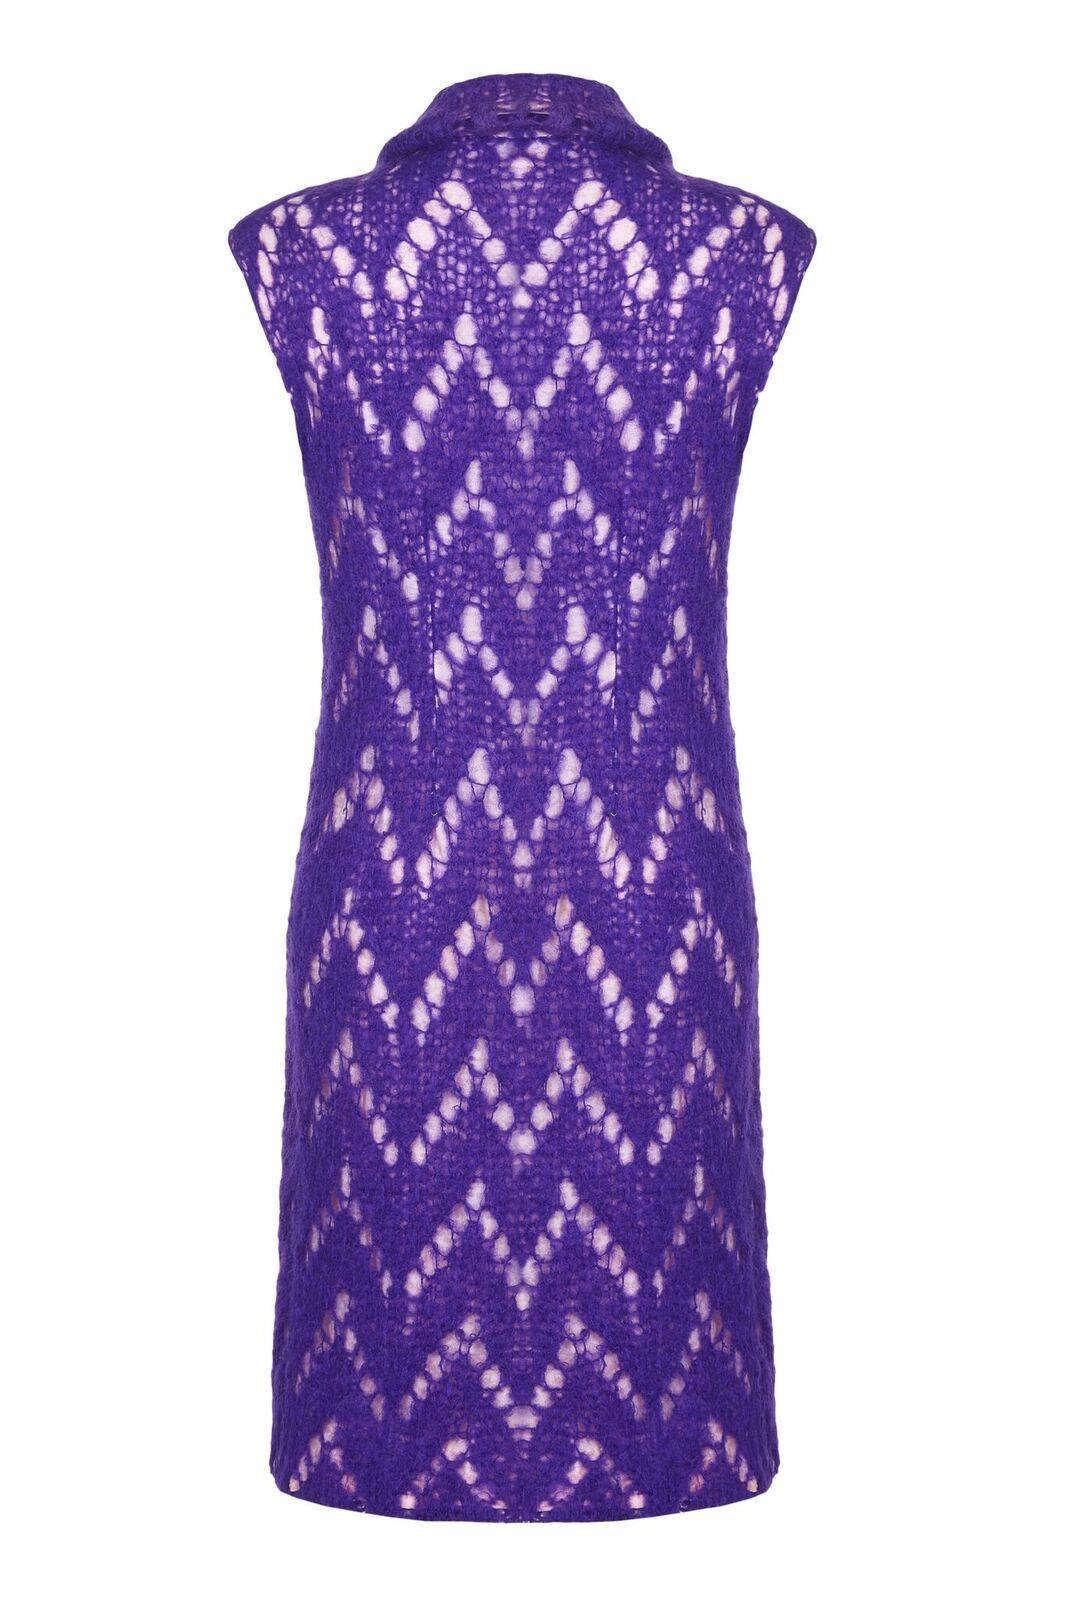 This unusual 1960s Jo Giovanni Italian boutique label purple wool knit dress has some striking design features and would make a wonderful winter warmer! The dress is sleeveless with slightly capped shoulders and a knitted shirt collar which